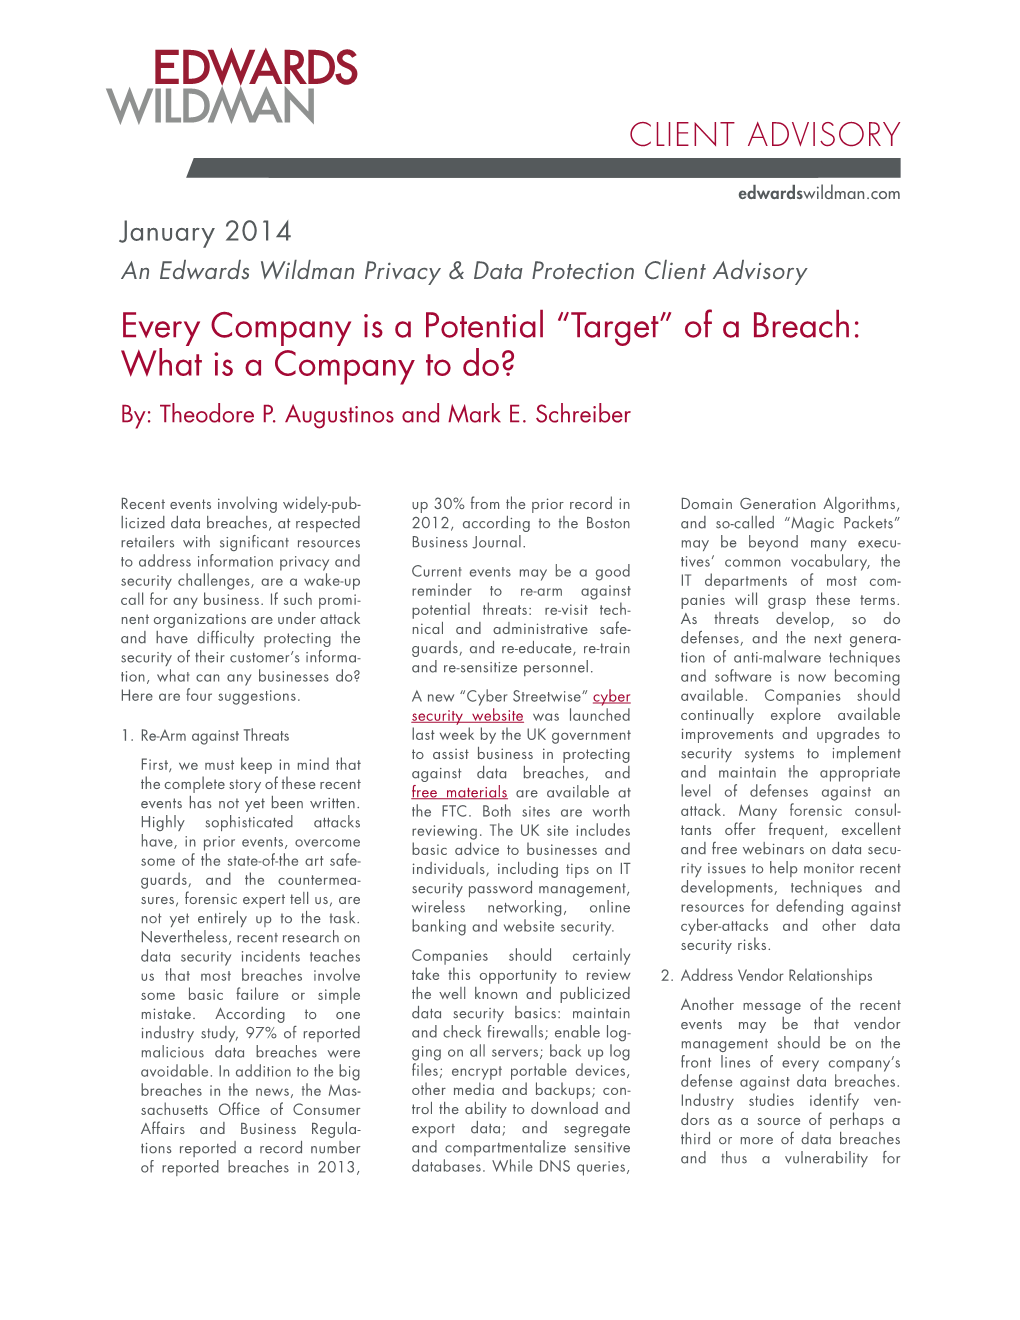 Every Company Is a Potential “Target” of a Breach: What Is a Company to Do? By: Theodore P